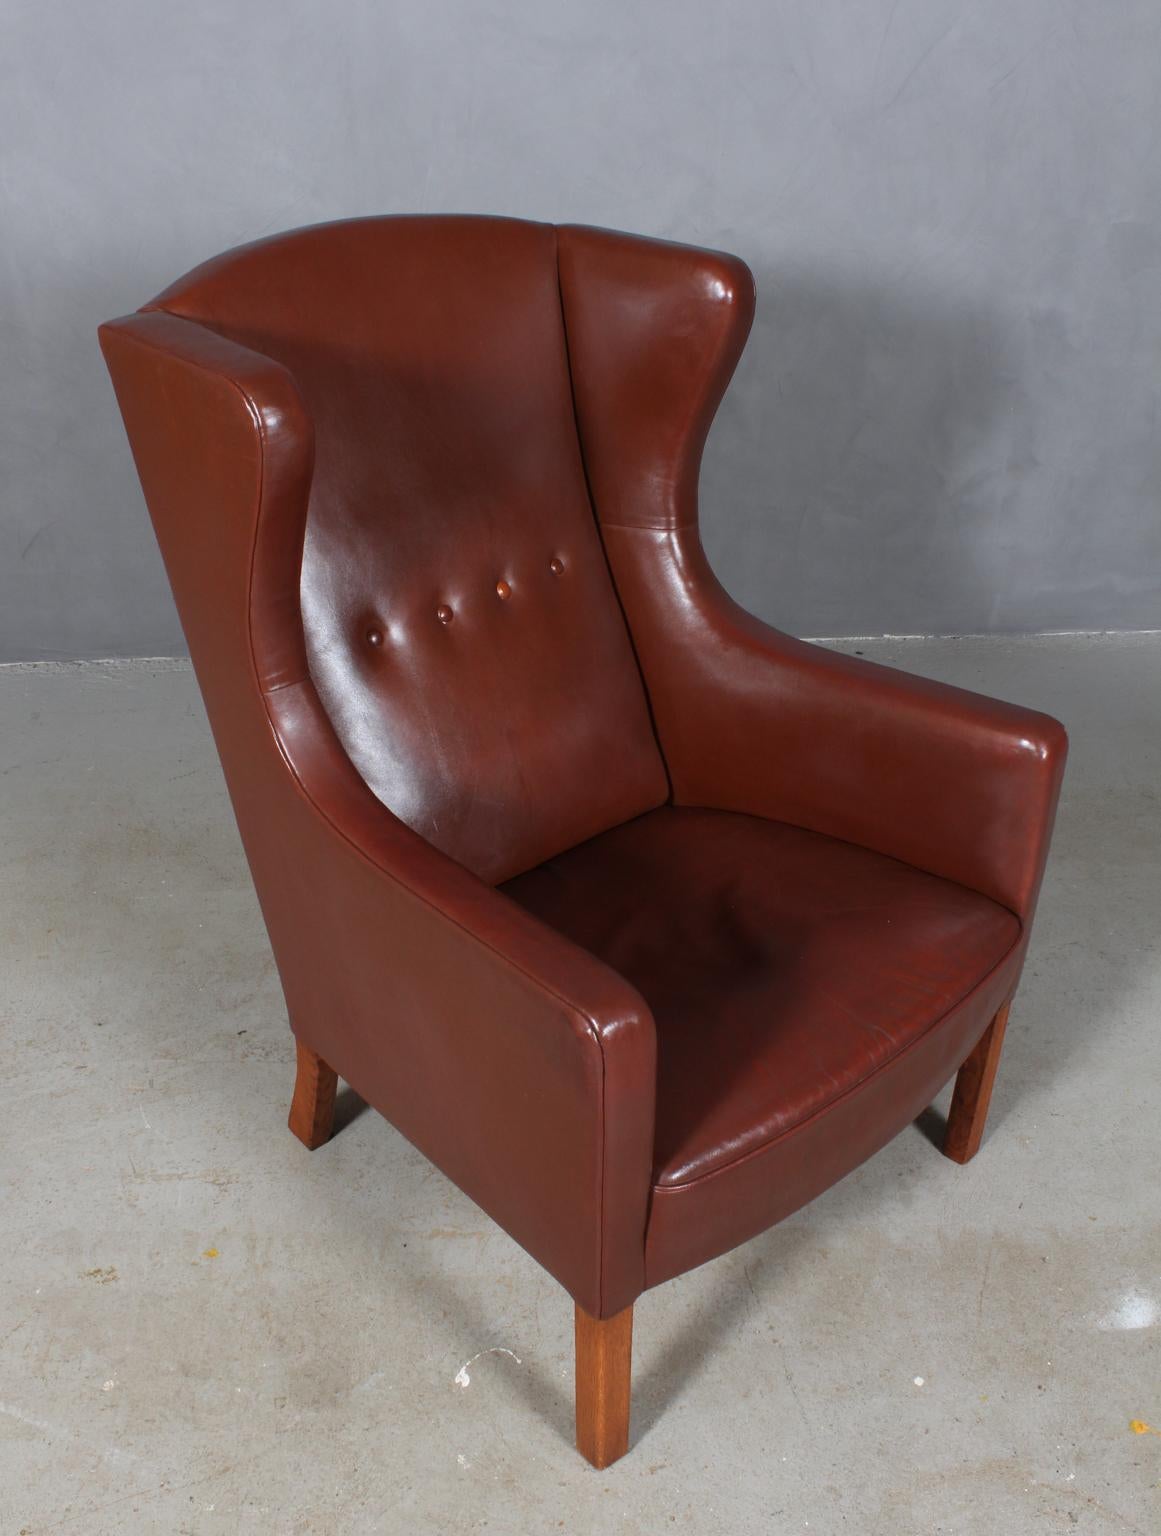 Børge Mogensen wingback chair in original brown leather upholstery with buttons.

Legs of solid oak.

Model L3, made by FDB Møbler, 1950s.